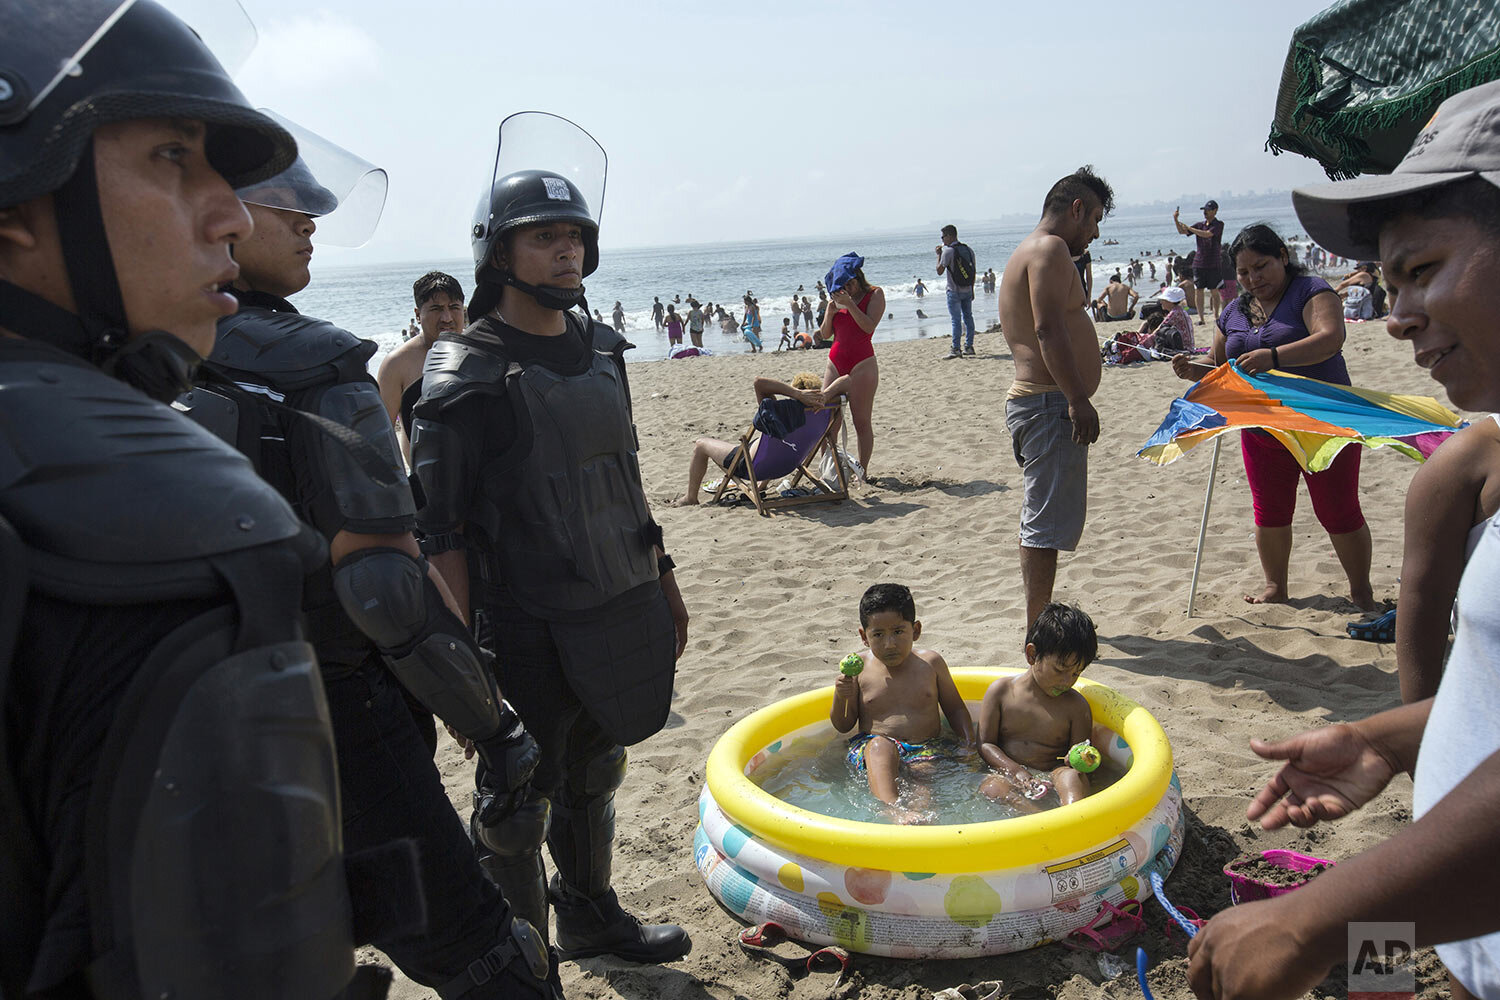  Boys sit in an inflatable pool while eating green sugar-coated apples as policemen work to remove an unlicensed food vendor, at Agua Dulce beach in Lima, Peru, Feb. 15, 2020. (AP Photo/Rodrigo Abd) 